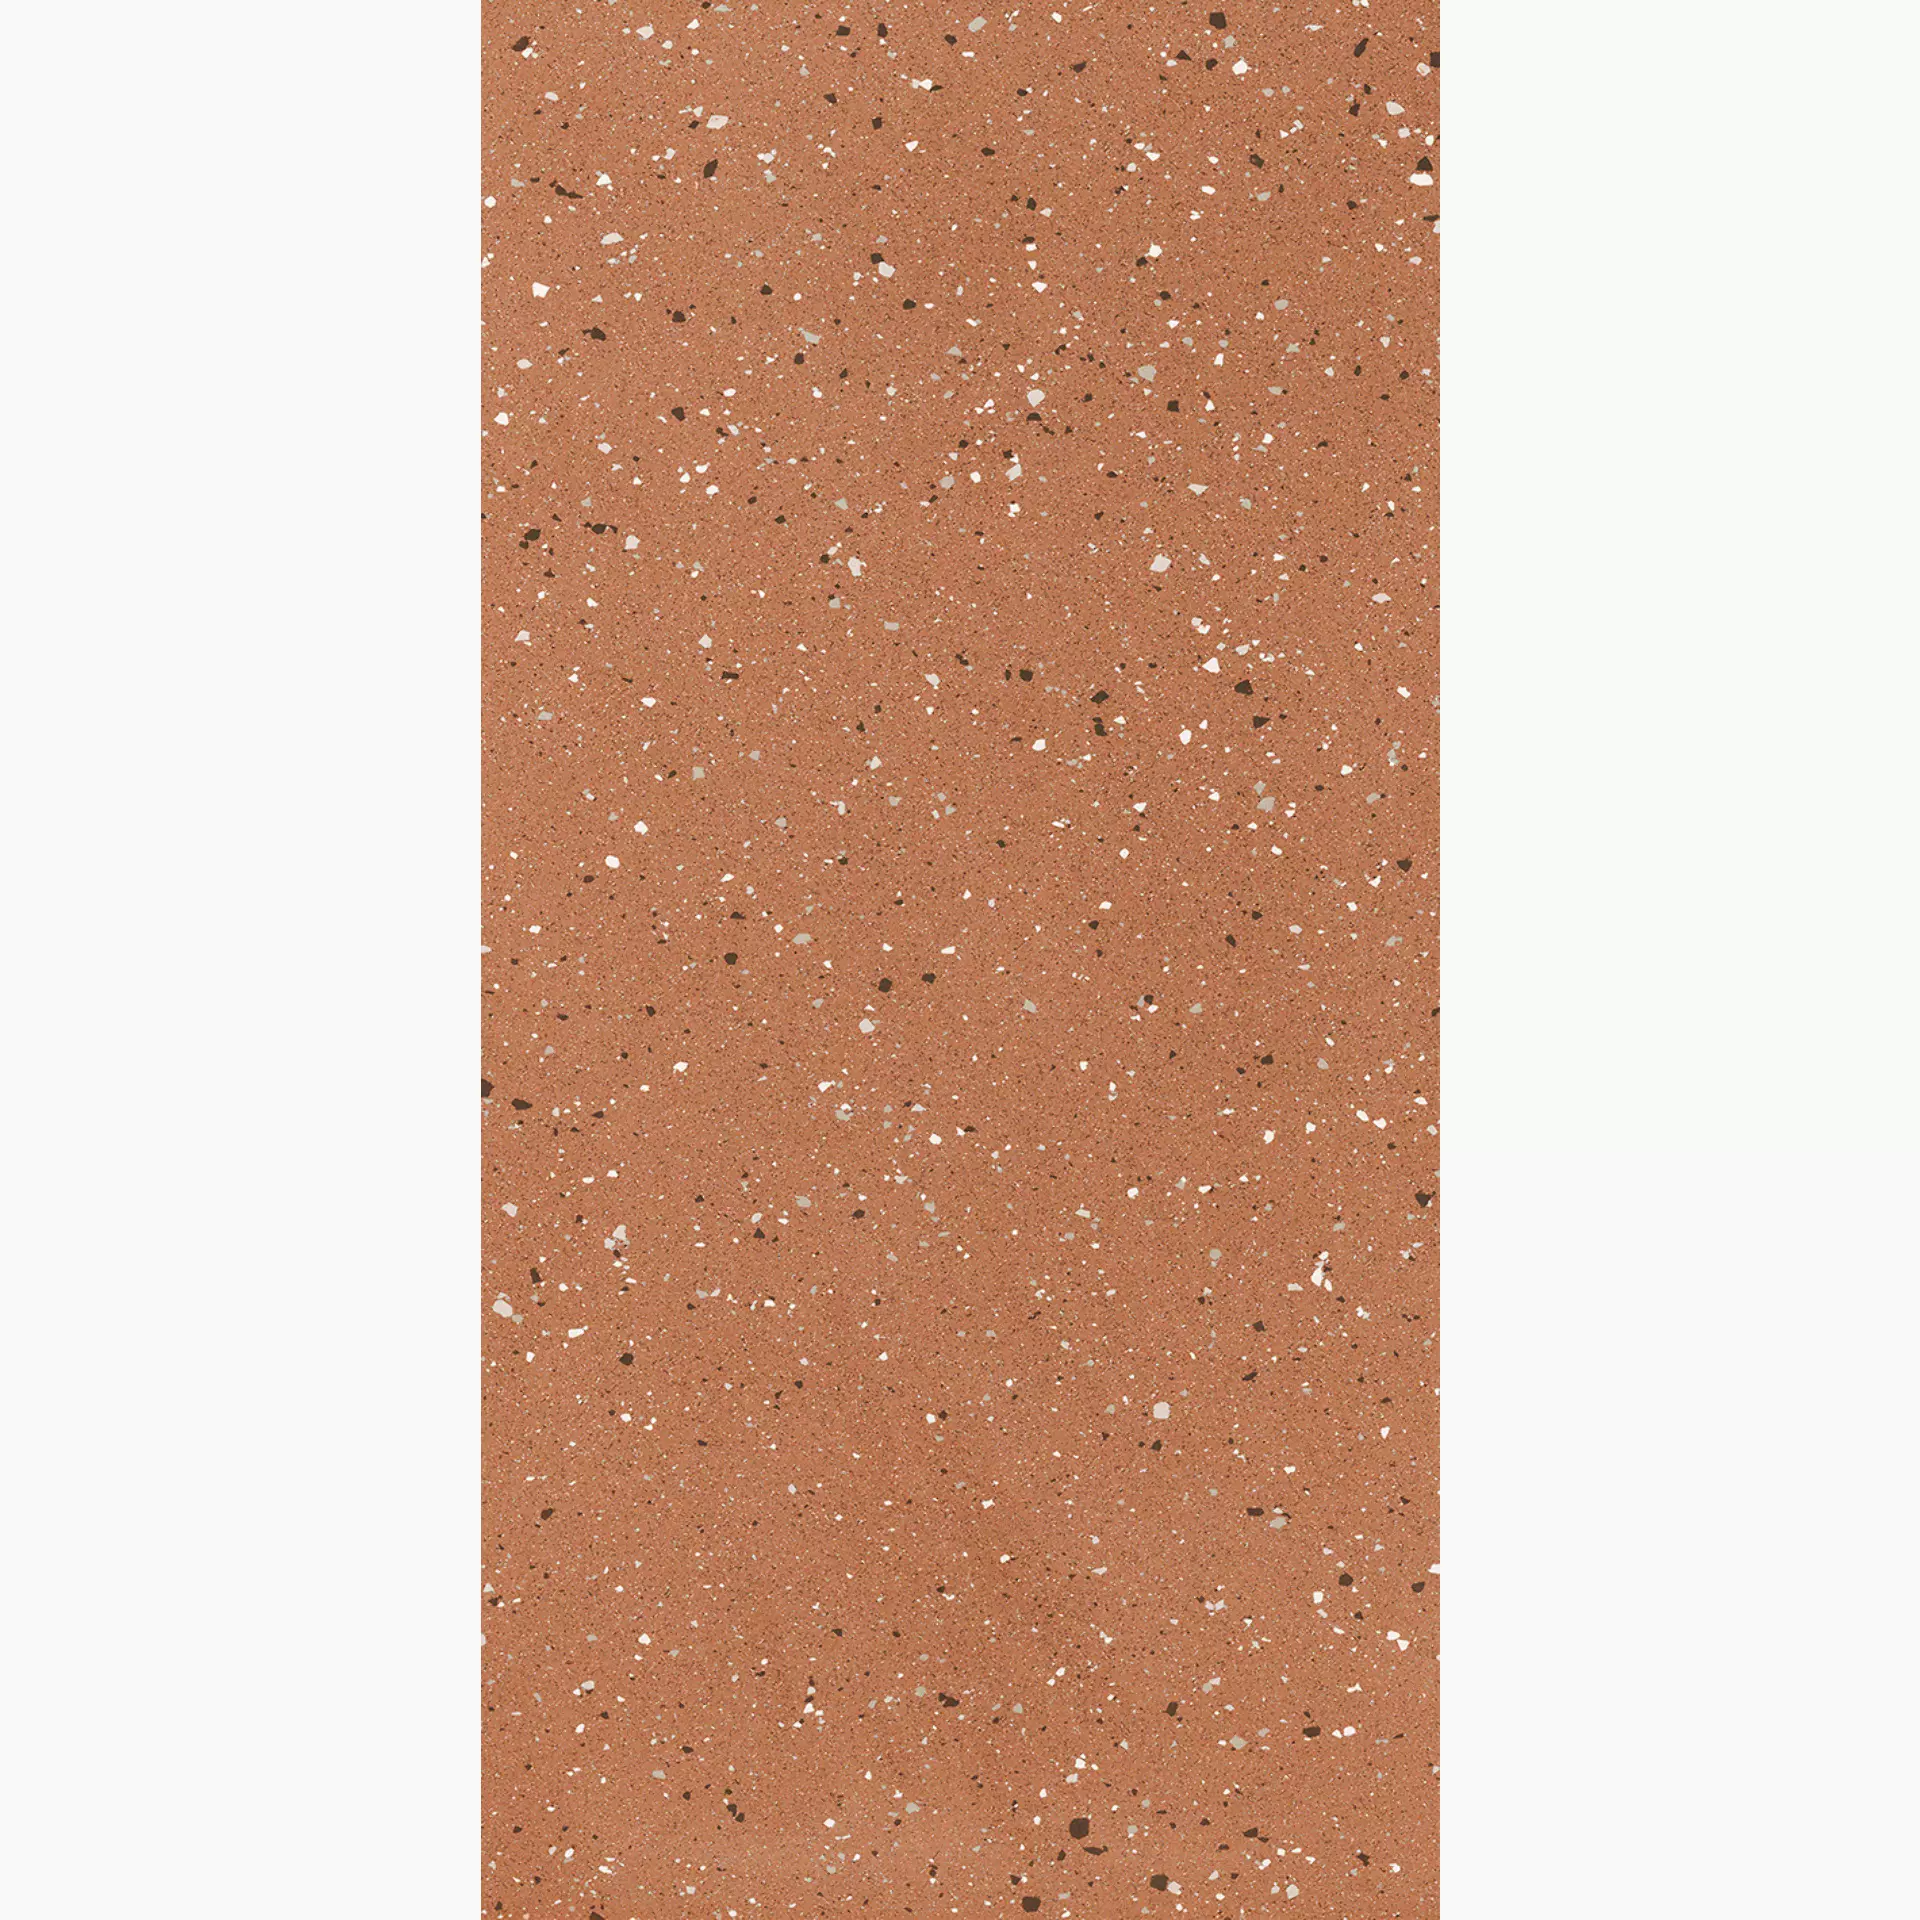 Florim Earthtech Outback_Flakes Glossy - Bright 776948 60x120cm rectified 9mm